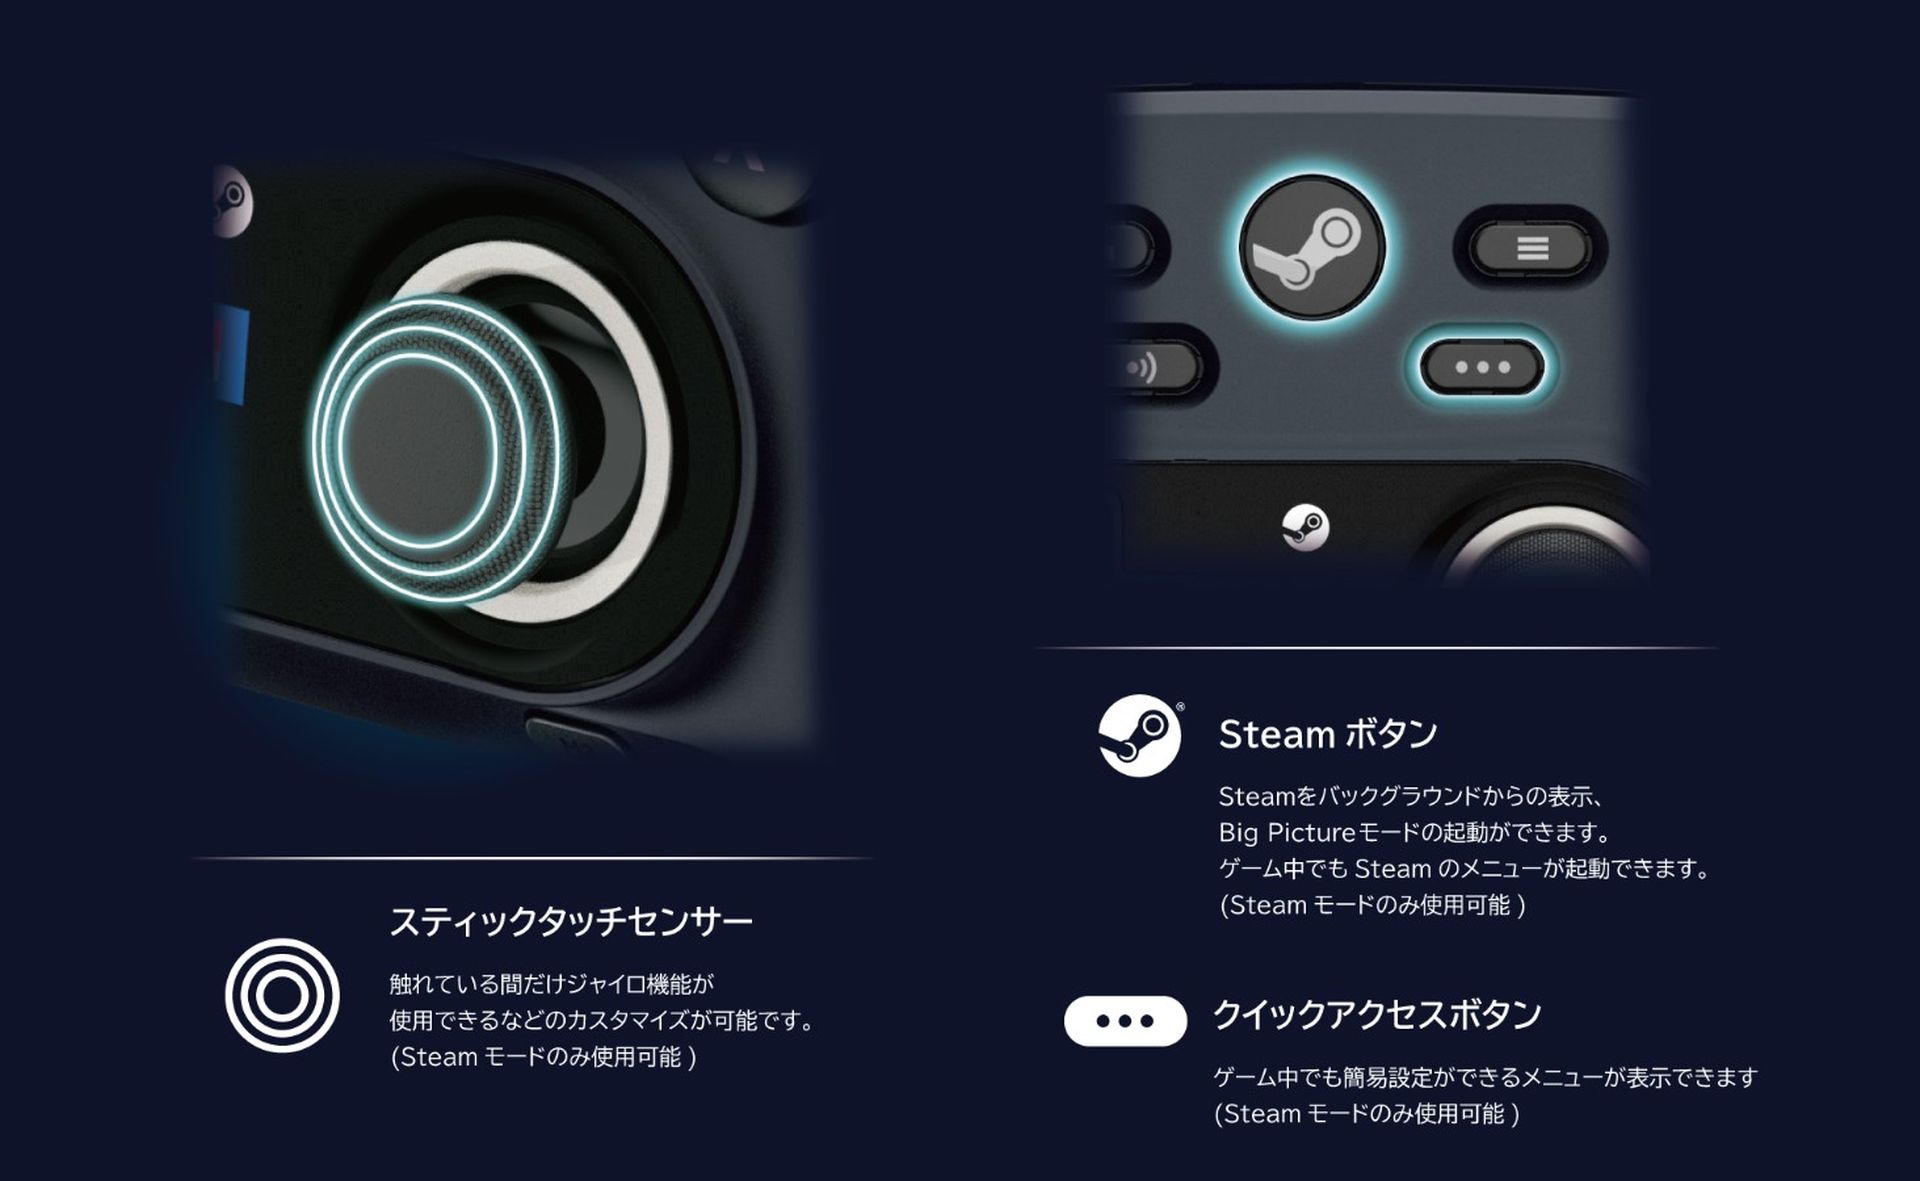 Hori Steam Controller unveiled: Here are features, price and release date